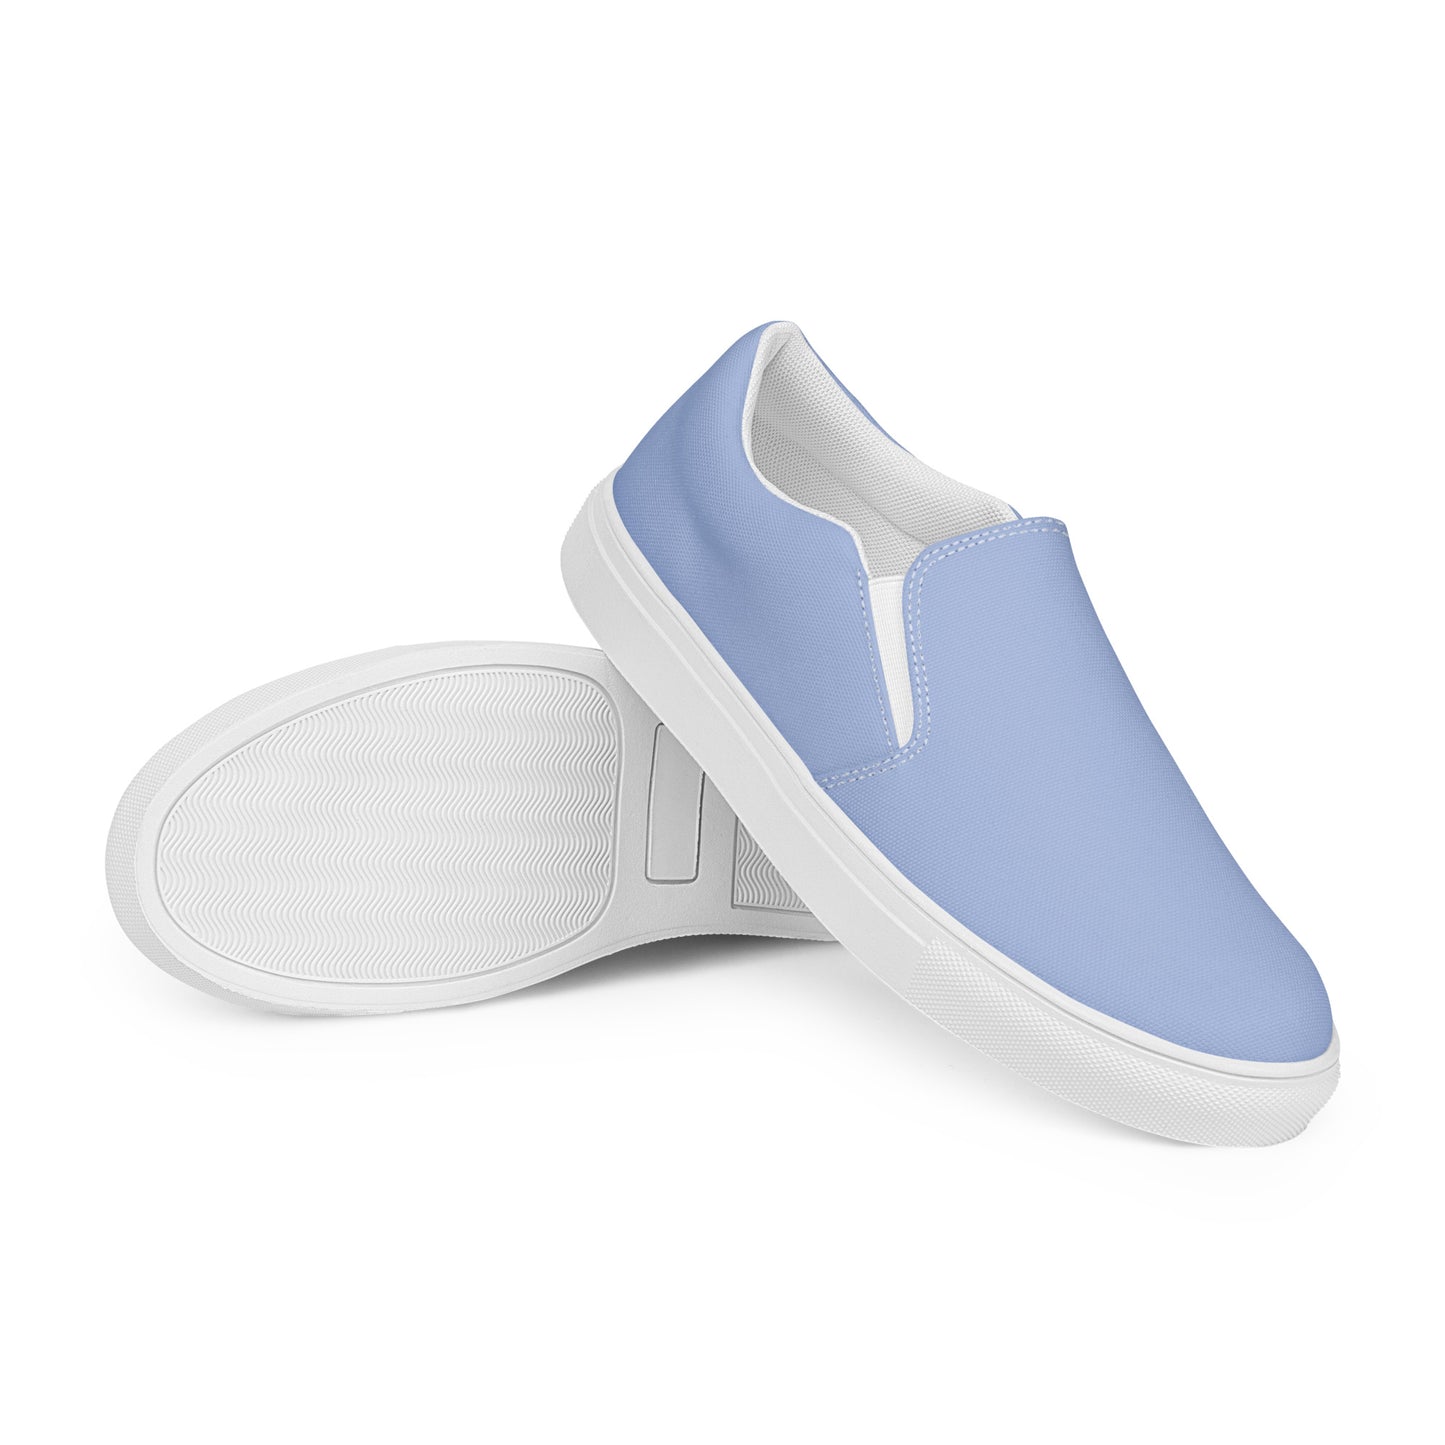 Cornflowers - Sustainably Made Women's  Slip-On Canvas Shoes